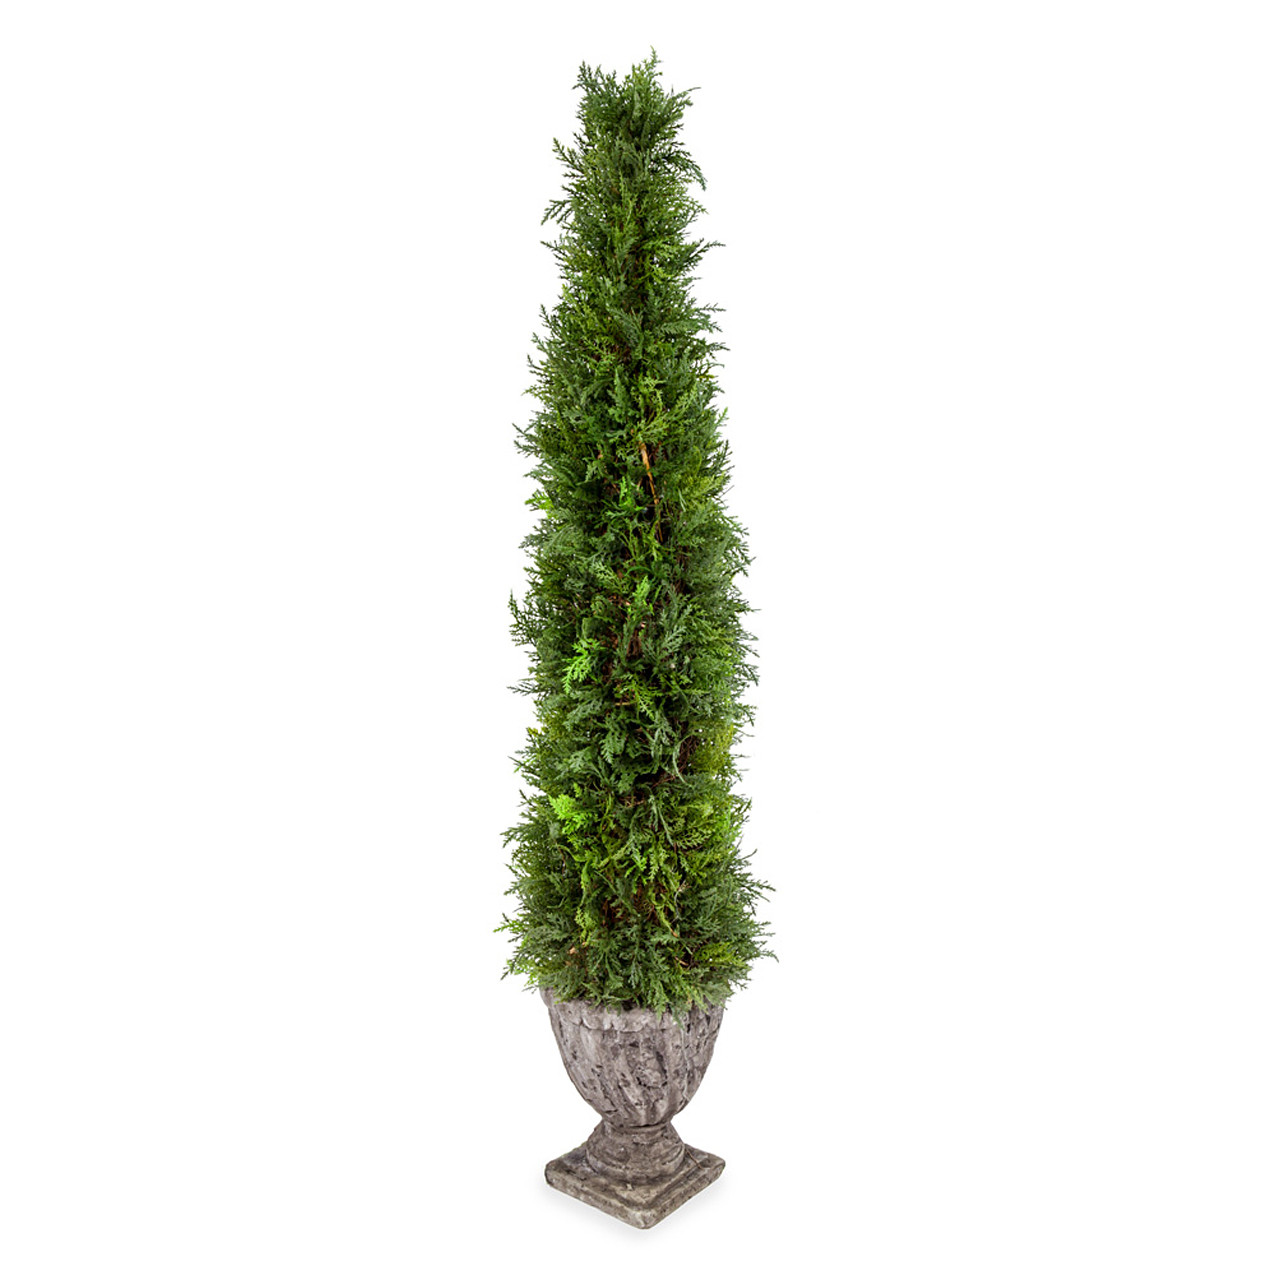 4 ft. Boxwood Artificial Topiary Tower in Clay Pot